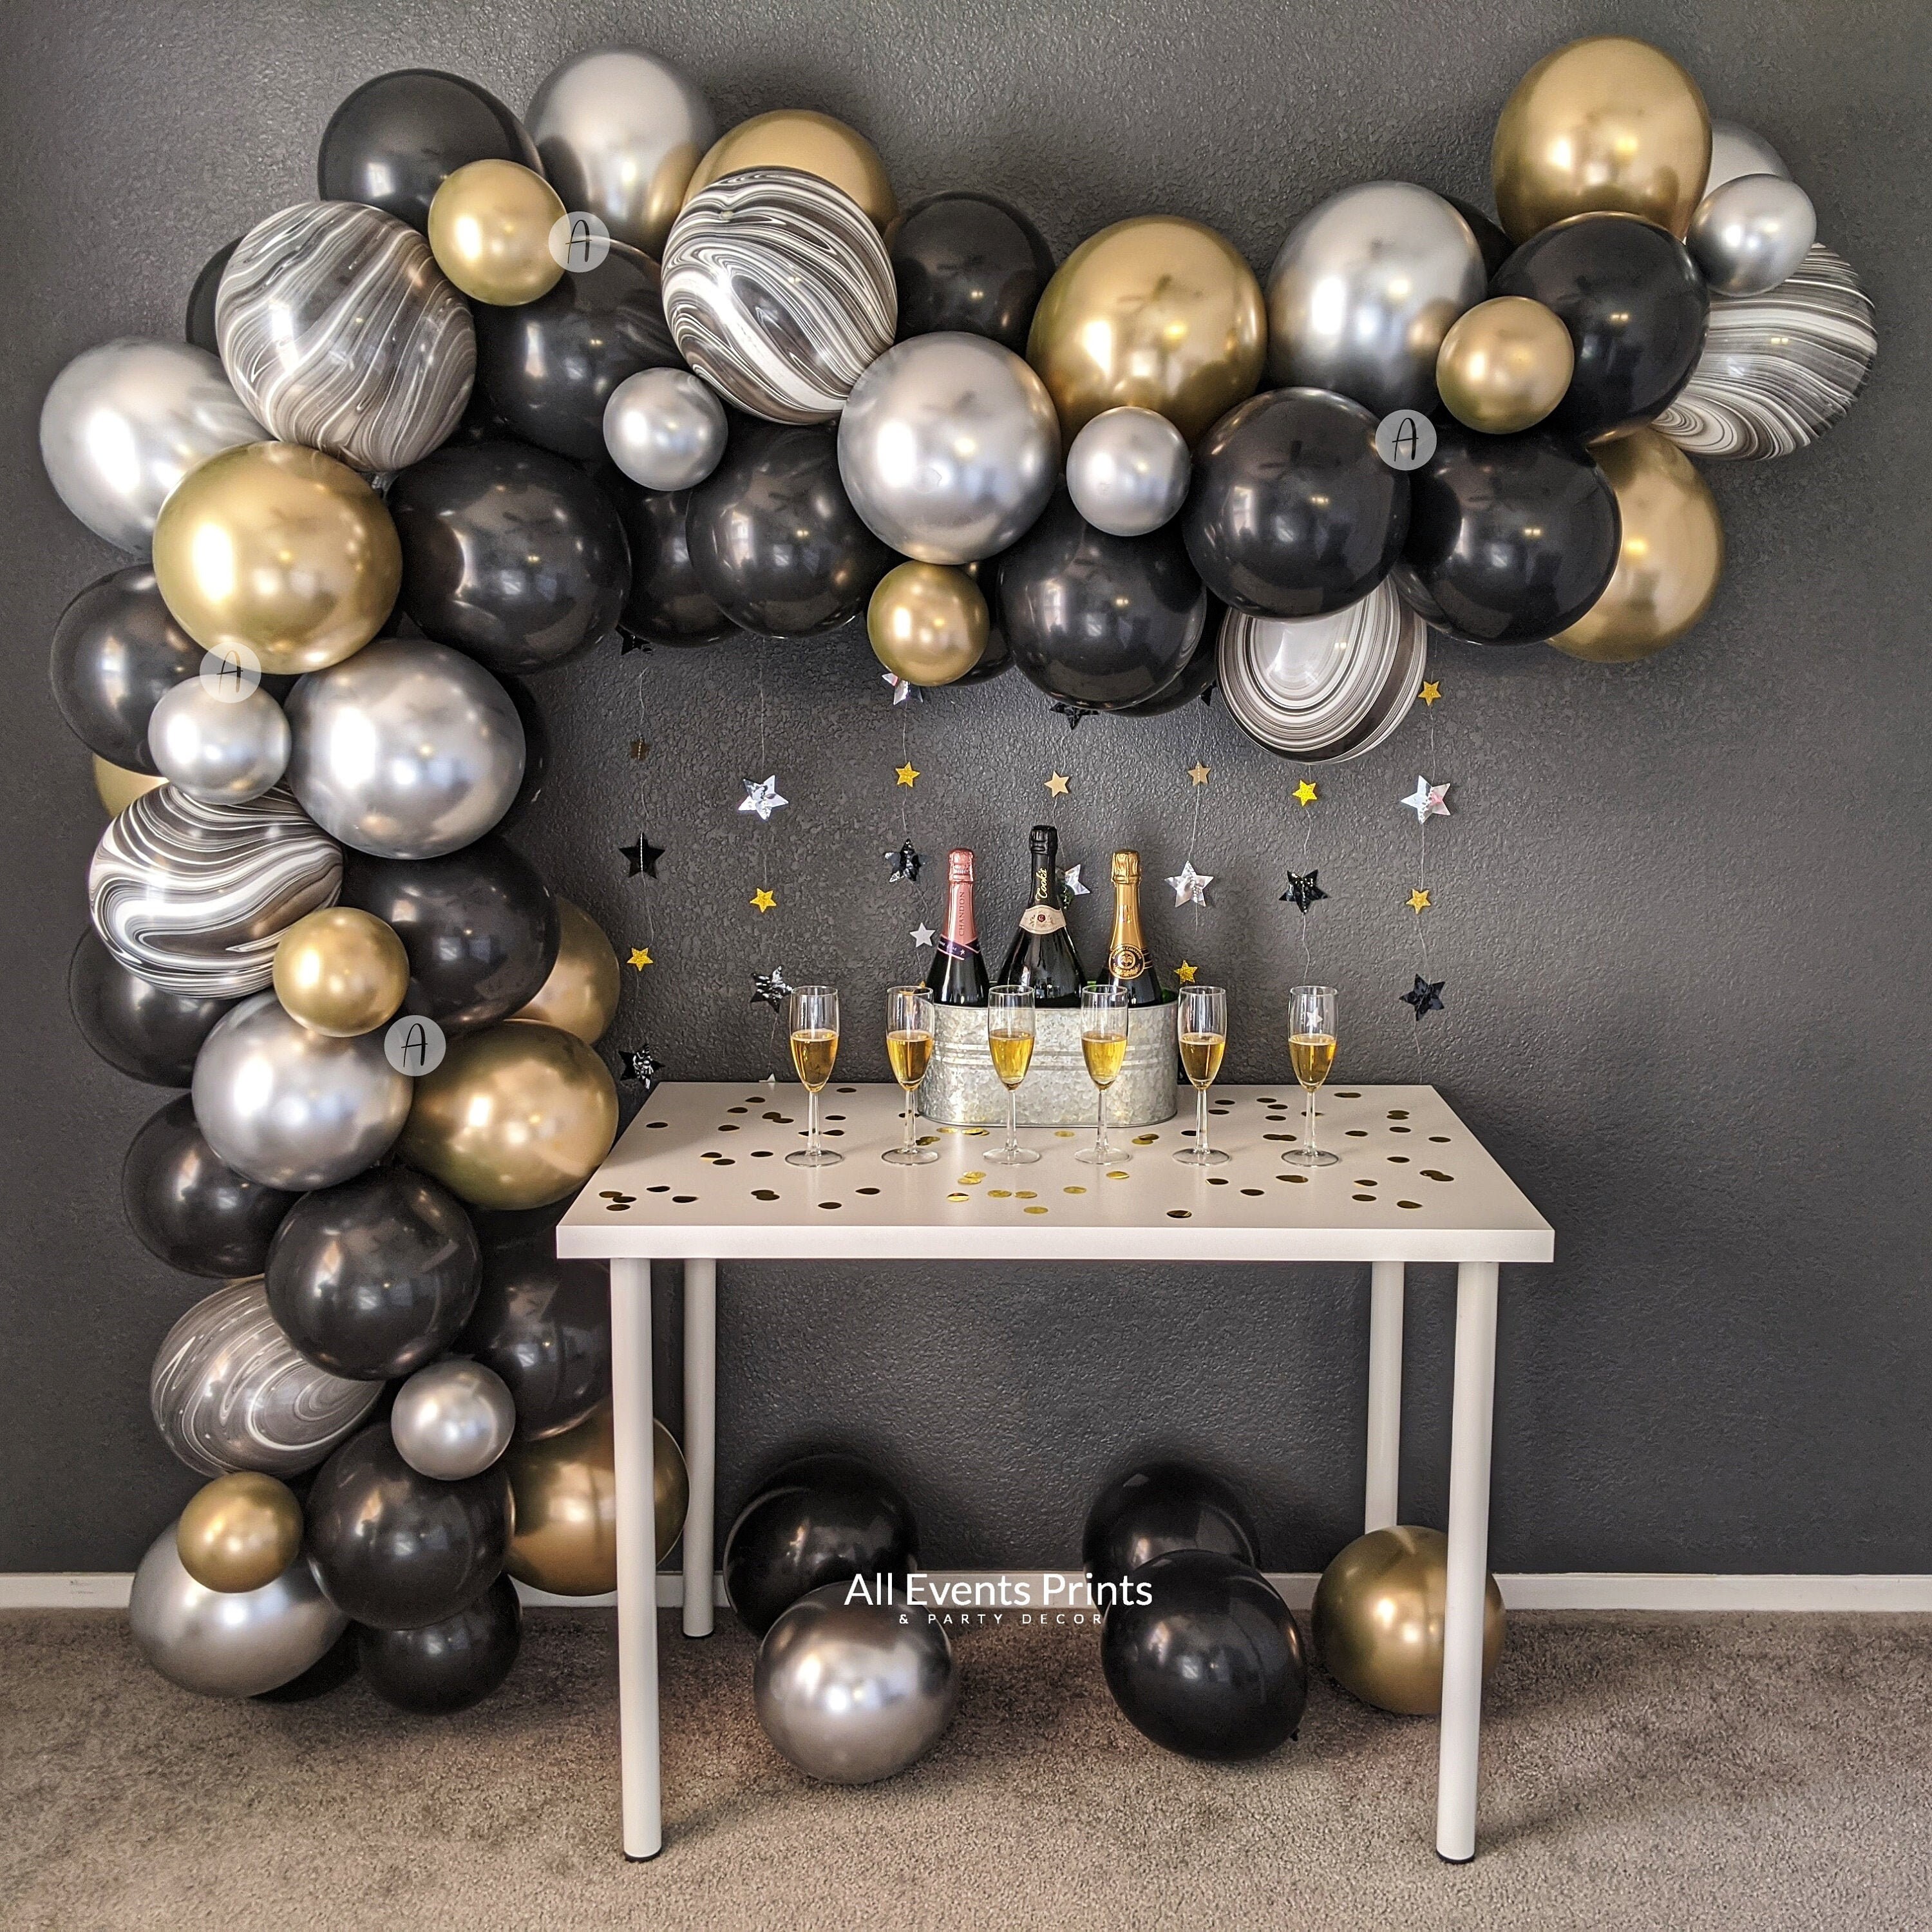 Great Gatsby Party Decorations Party Like Gatsby Balloons Black Gold  Balloon Garland Arch Kit Roaring 20s Party Decorations